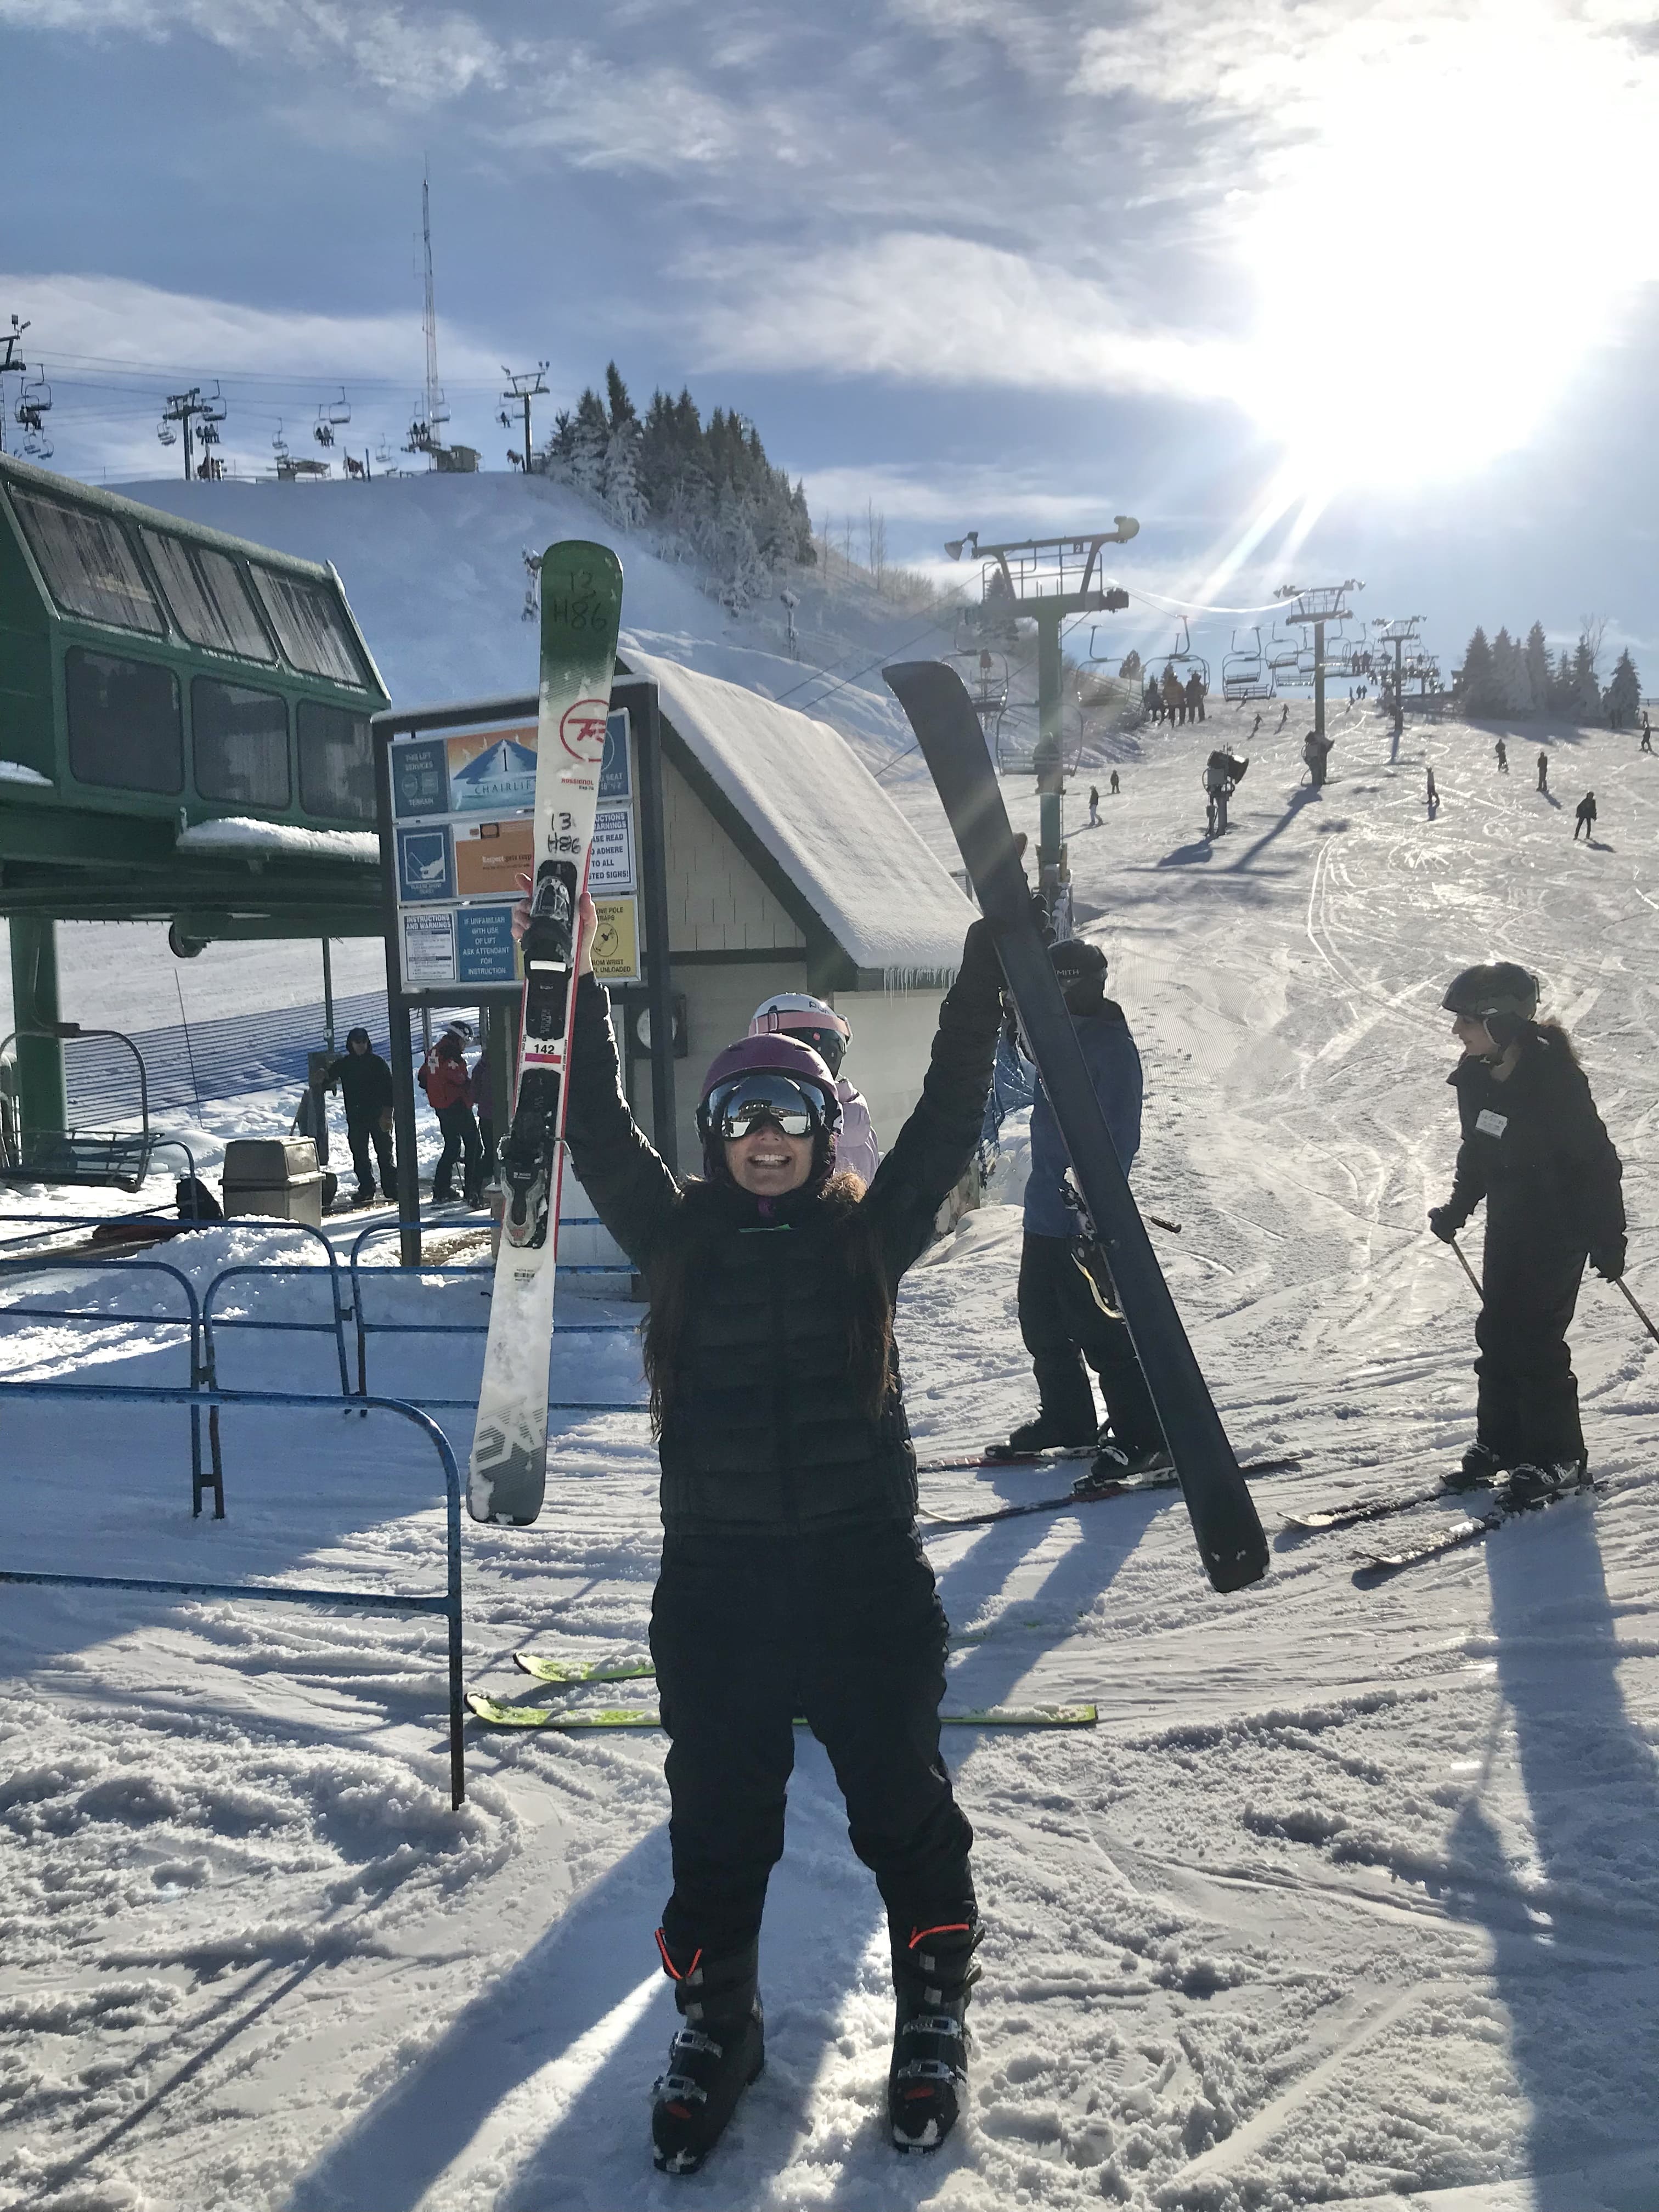 Facing your fear can mean winning: Author holding skis triumphantly